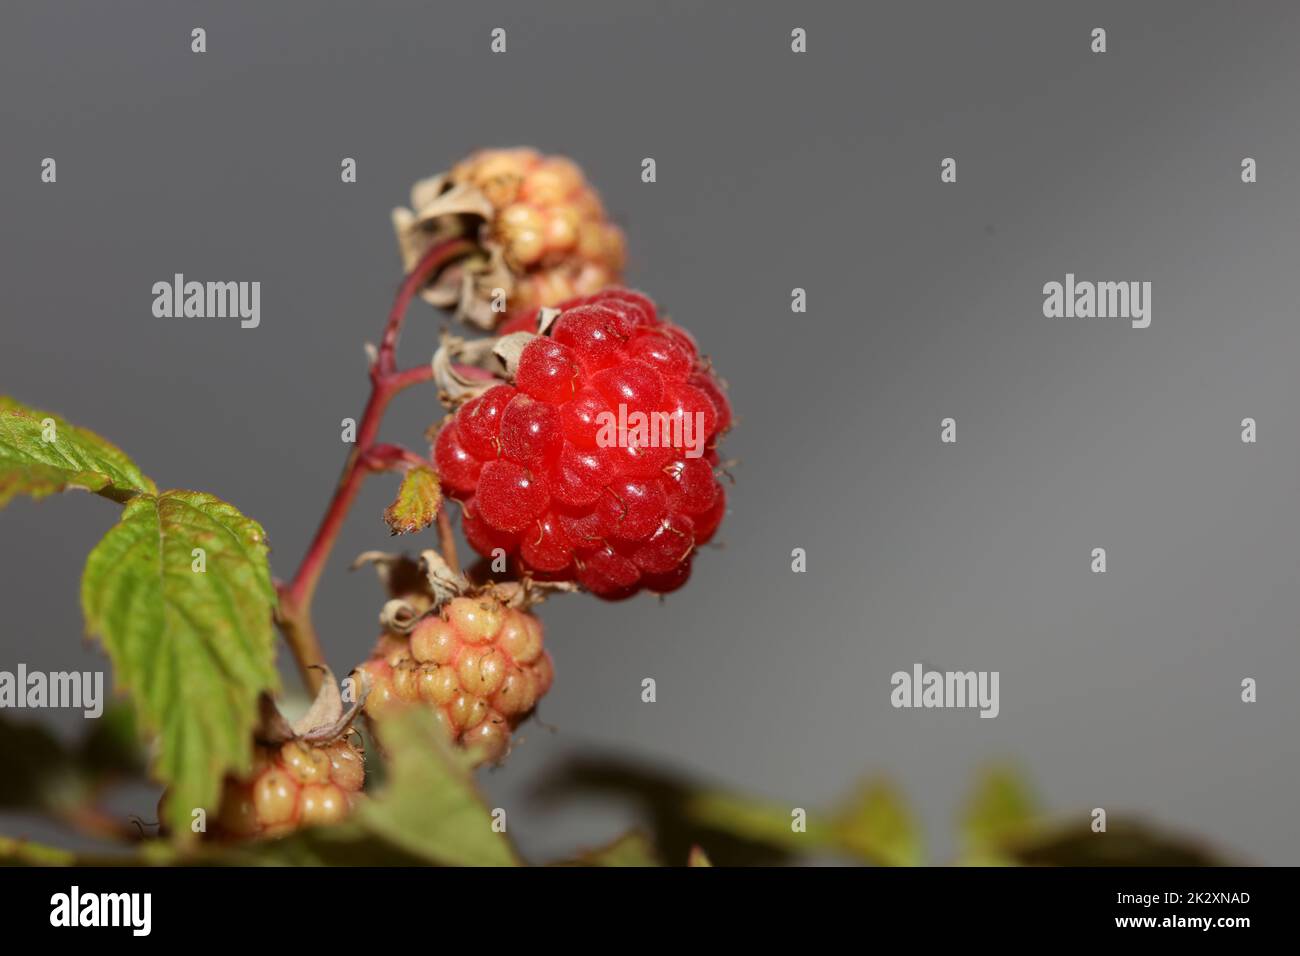 Wild red berry fruit close up modern botanical background rubus occidentalis family rosaceae high quality big size eating prints Stock Photo